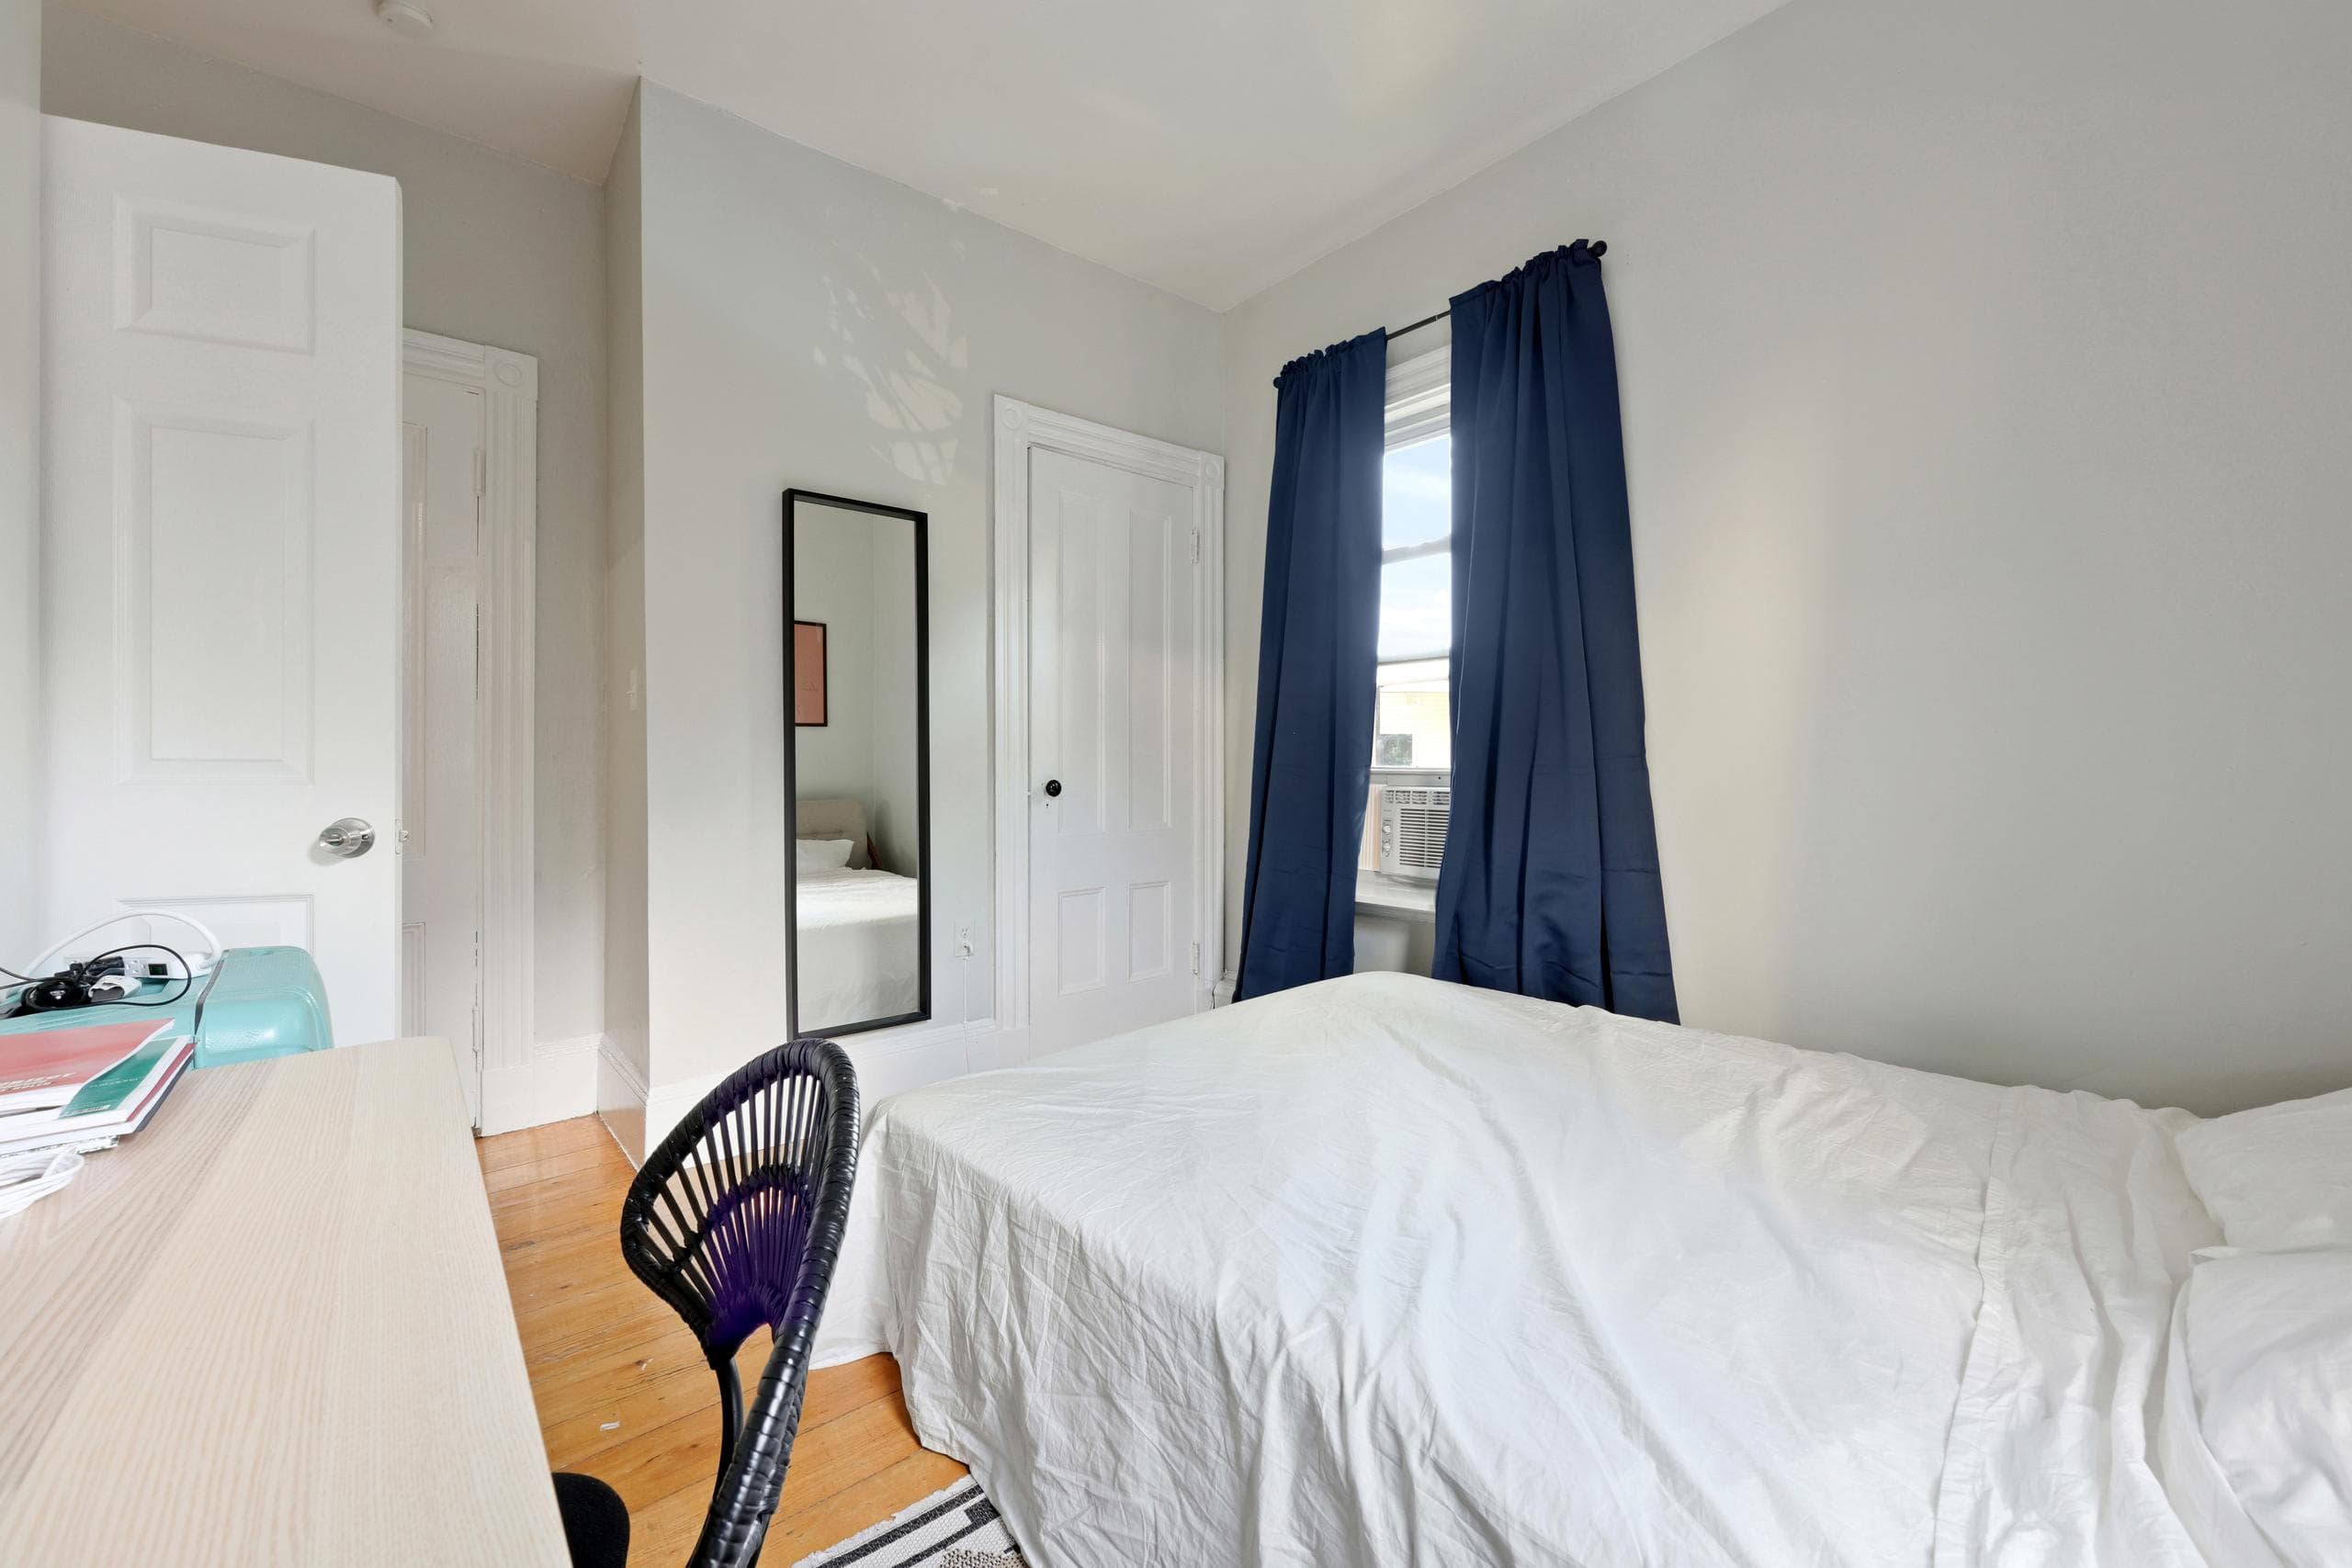 Photo 7 of #1206: Queen Bedroom A at June Homes